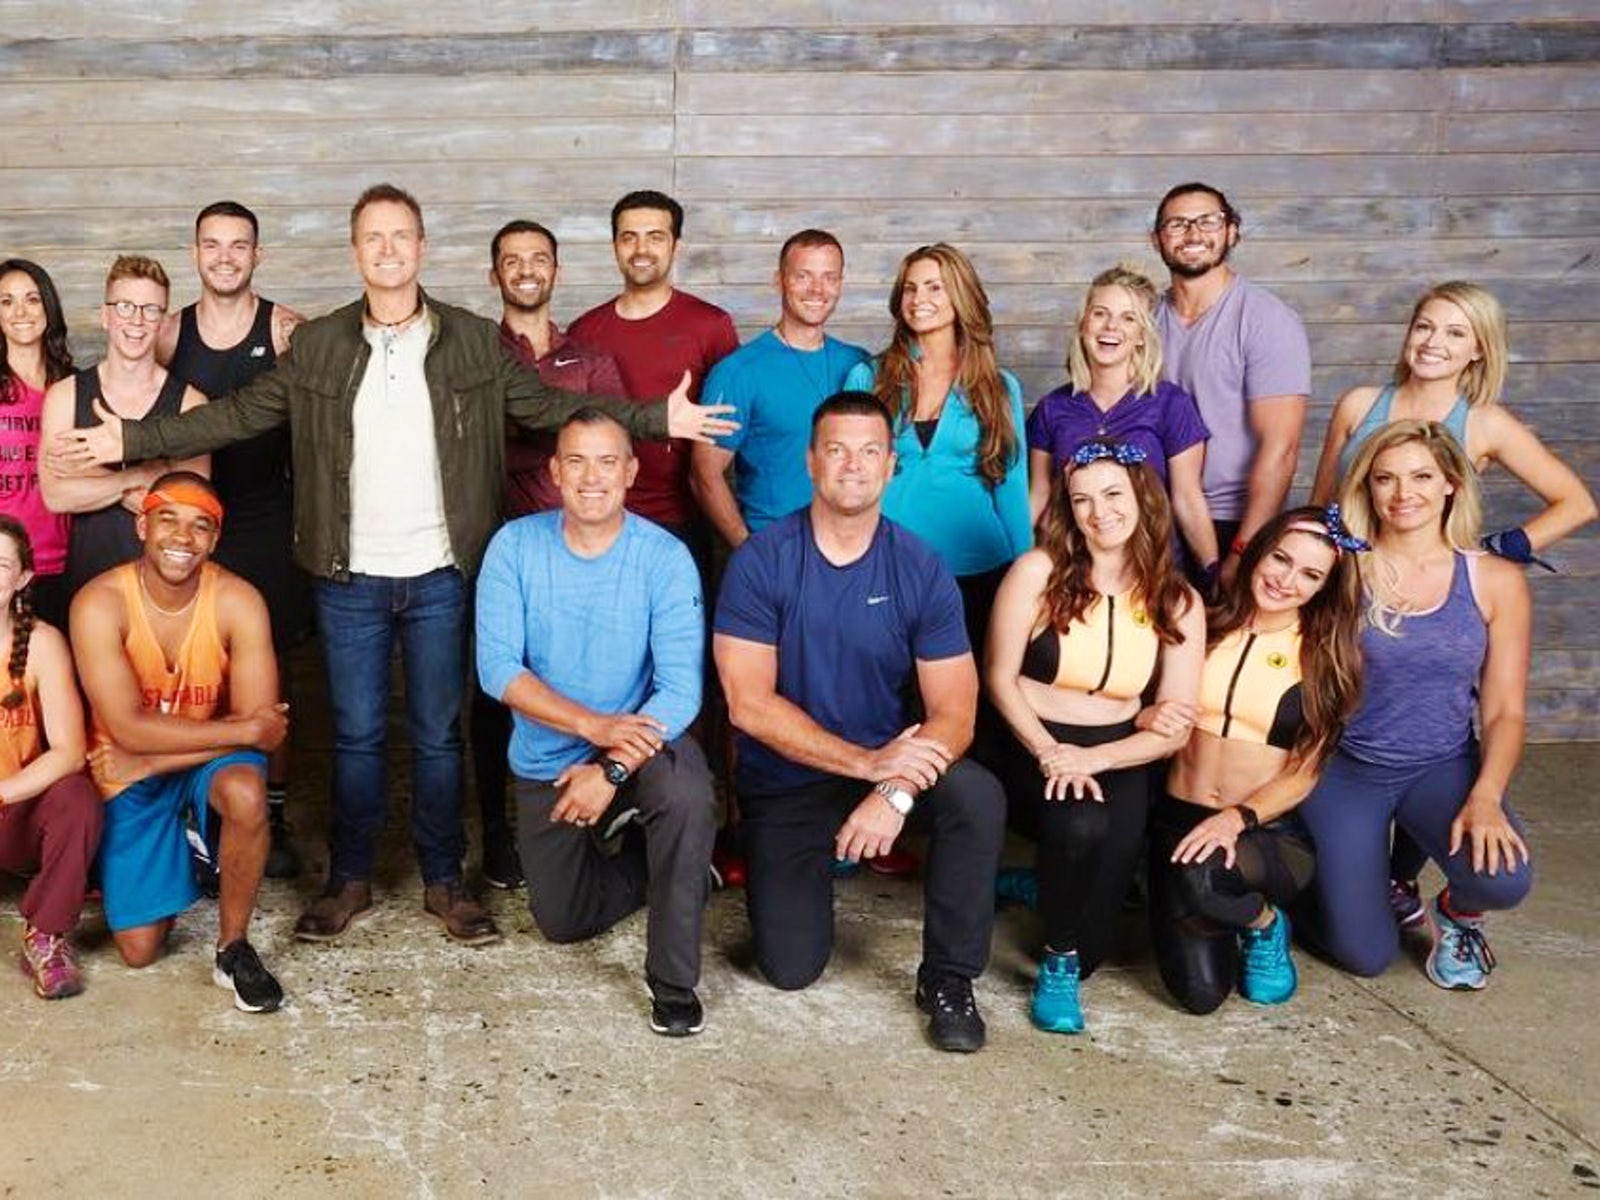 'The Amazing Race' Season 31 premiere bumped up to April 17, 11 reality